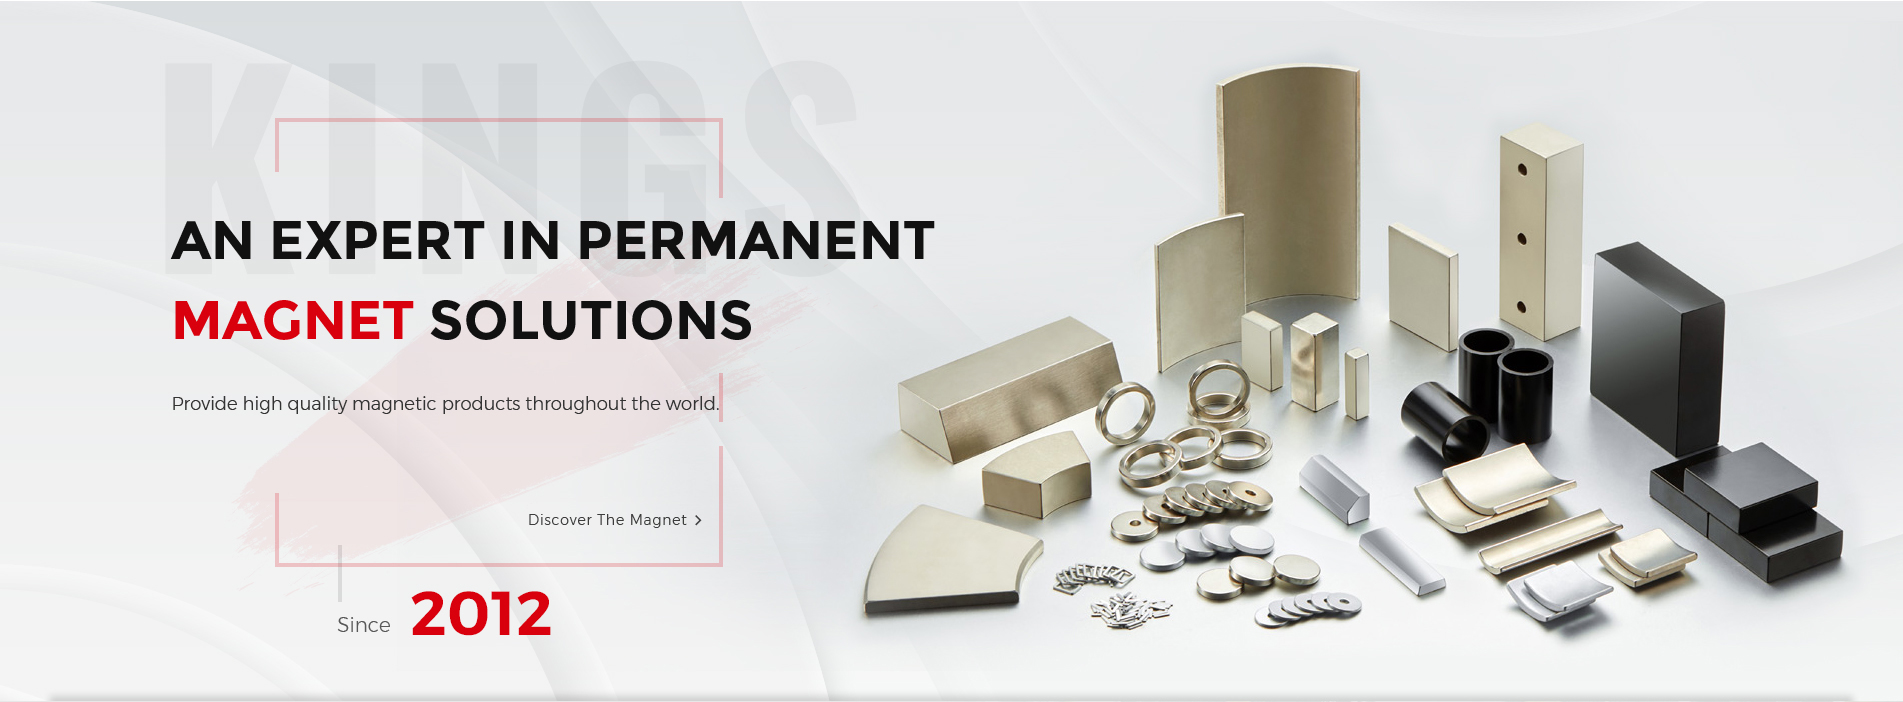 Permanent Magnet Solutions